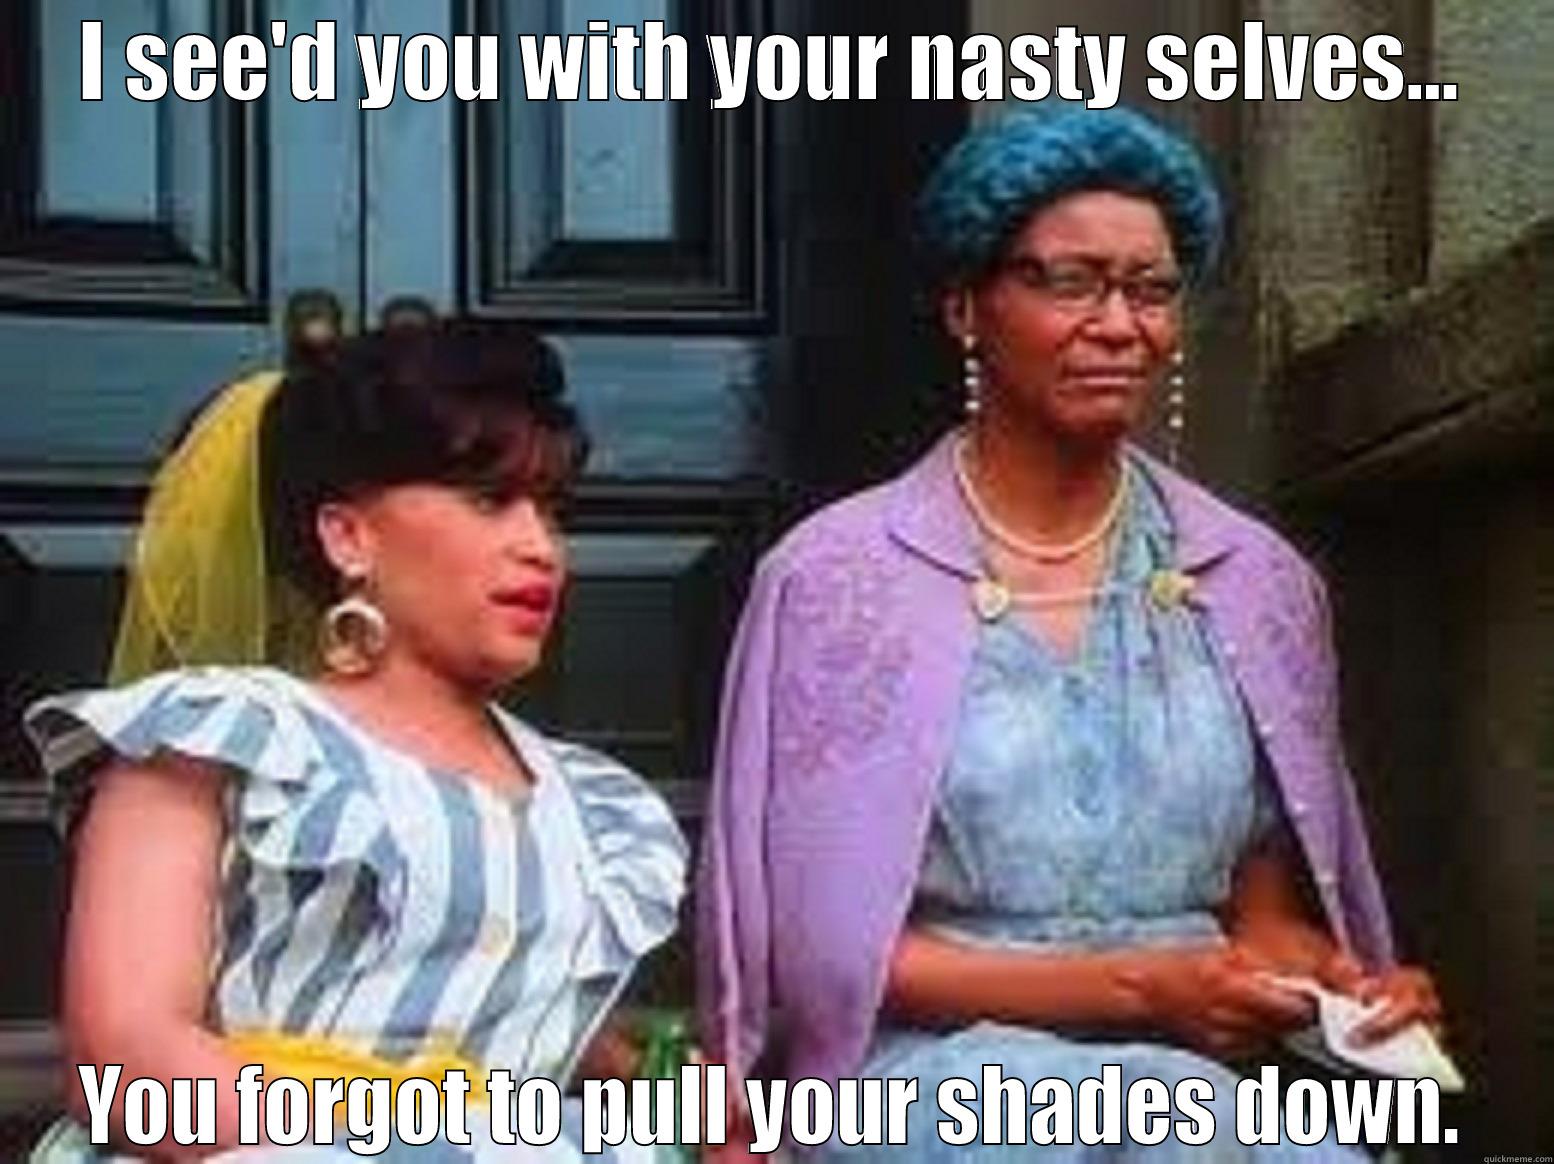 Shady Women - I SEE'D YOU WITH YOUR NASTY SELVES... YOU FORGOT TO PULL YOUR SHADES DOWN. Misc